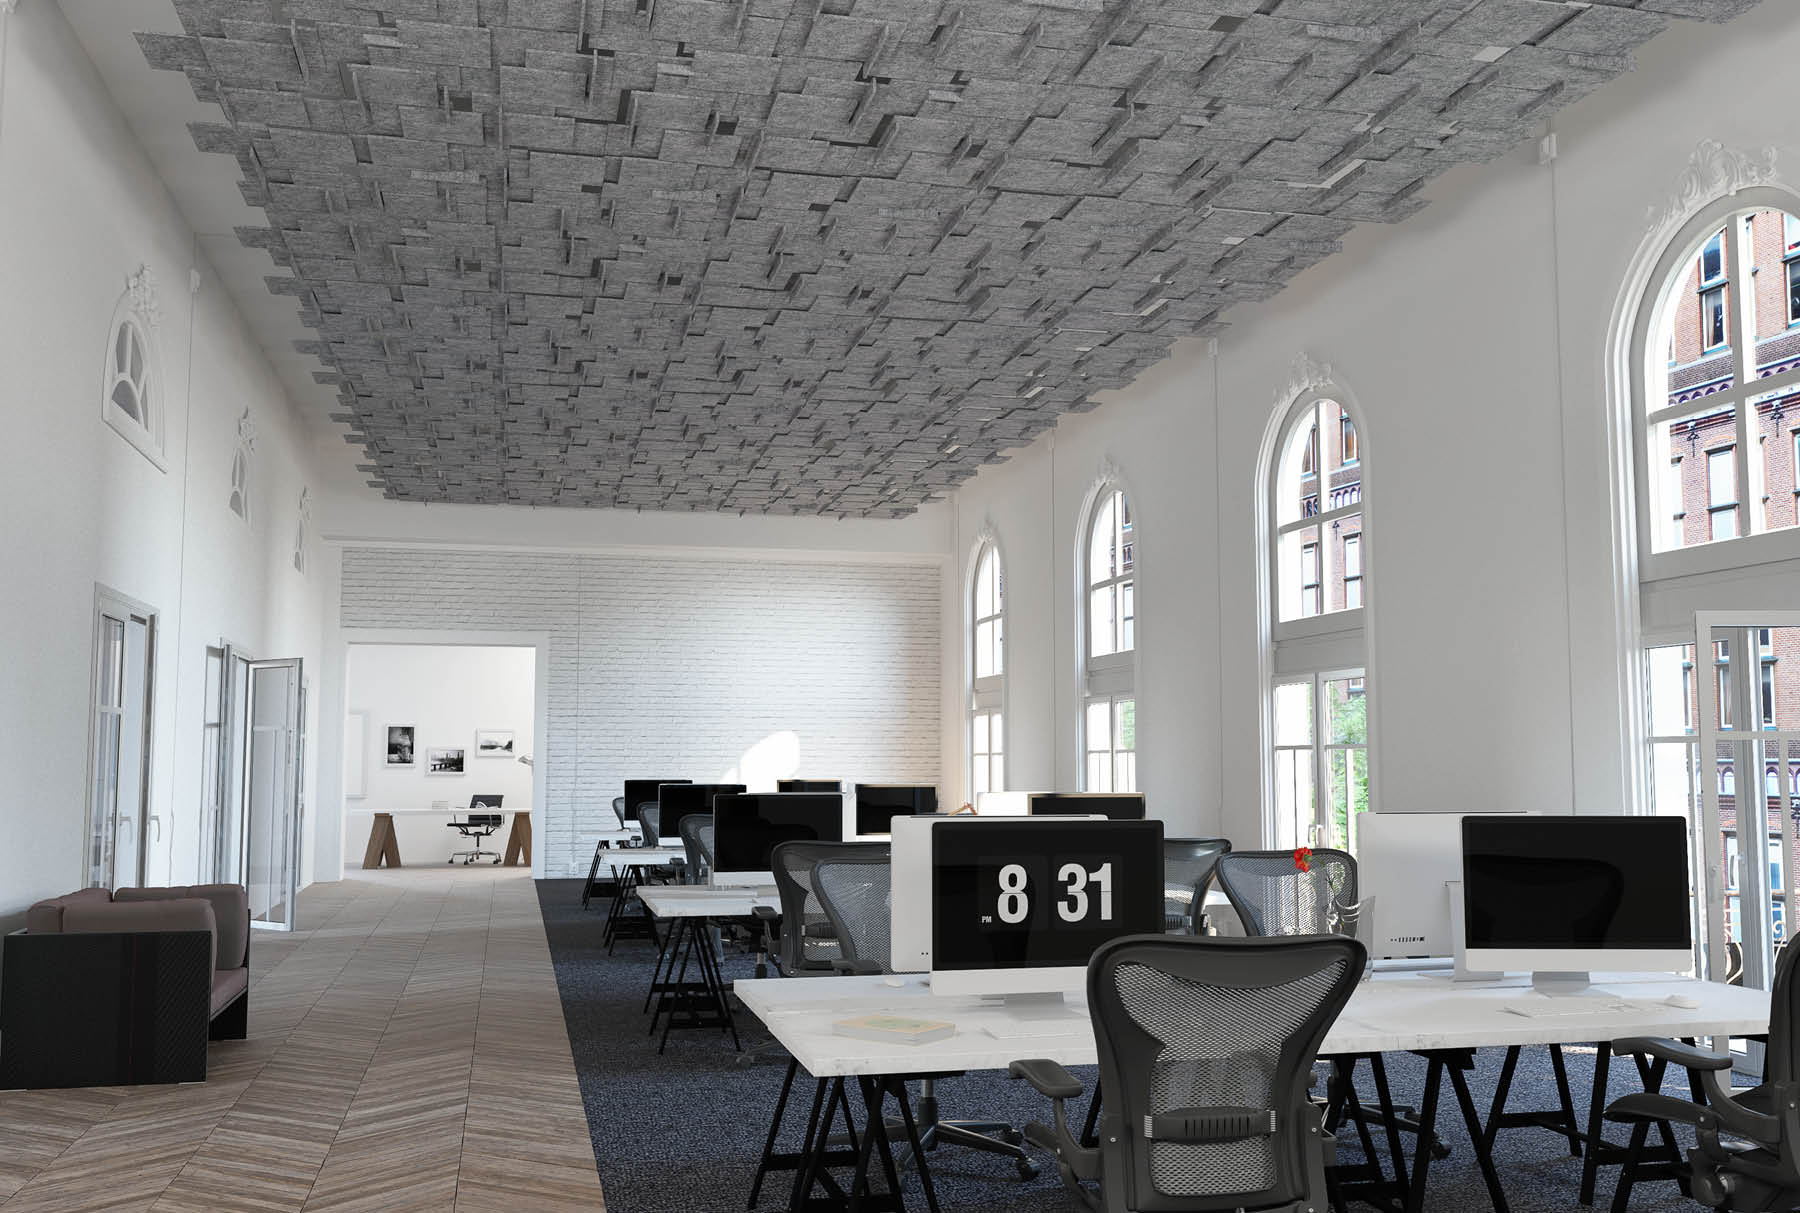 Acoustic Ceiling Tiles That Achieve Both Performance And Beauty